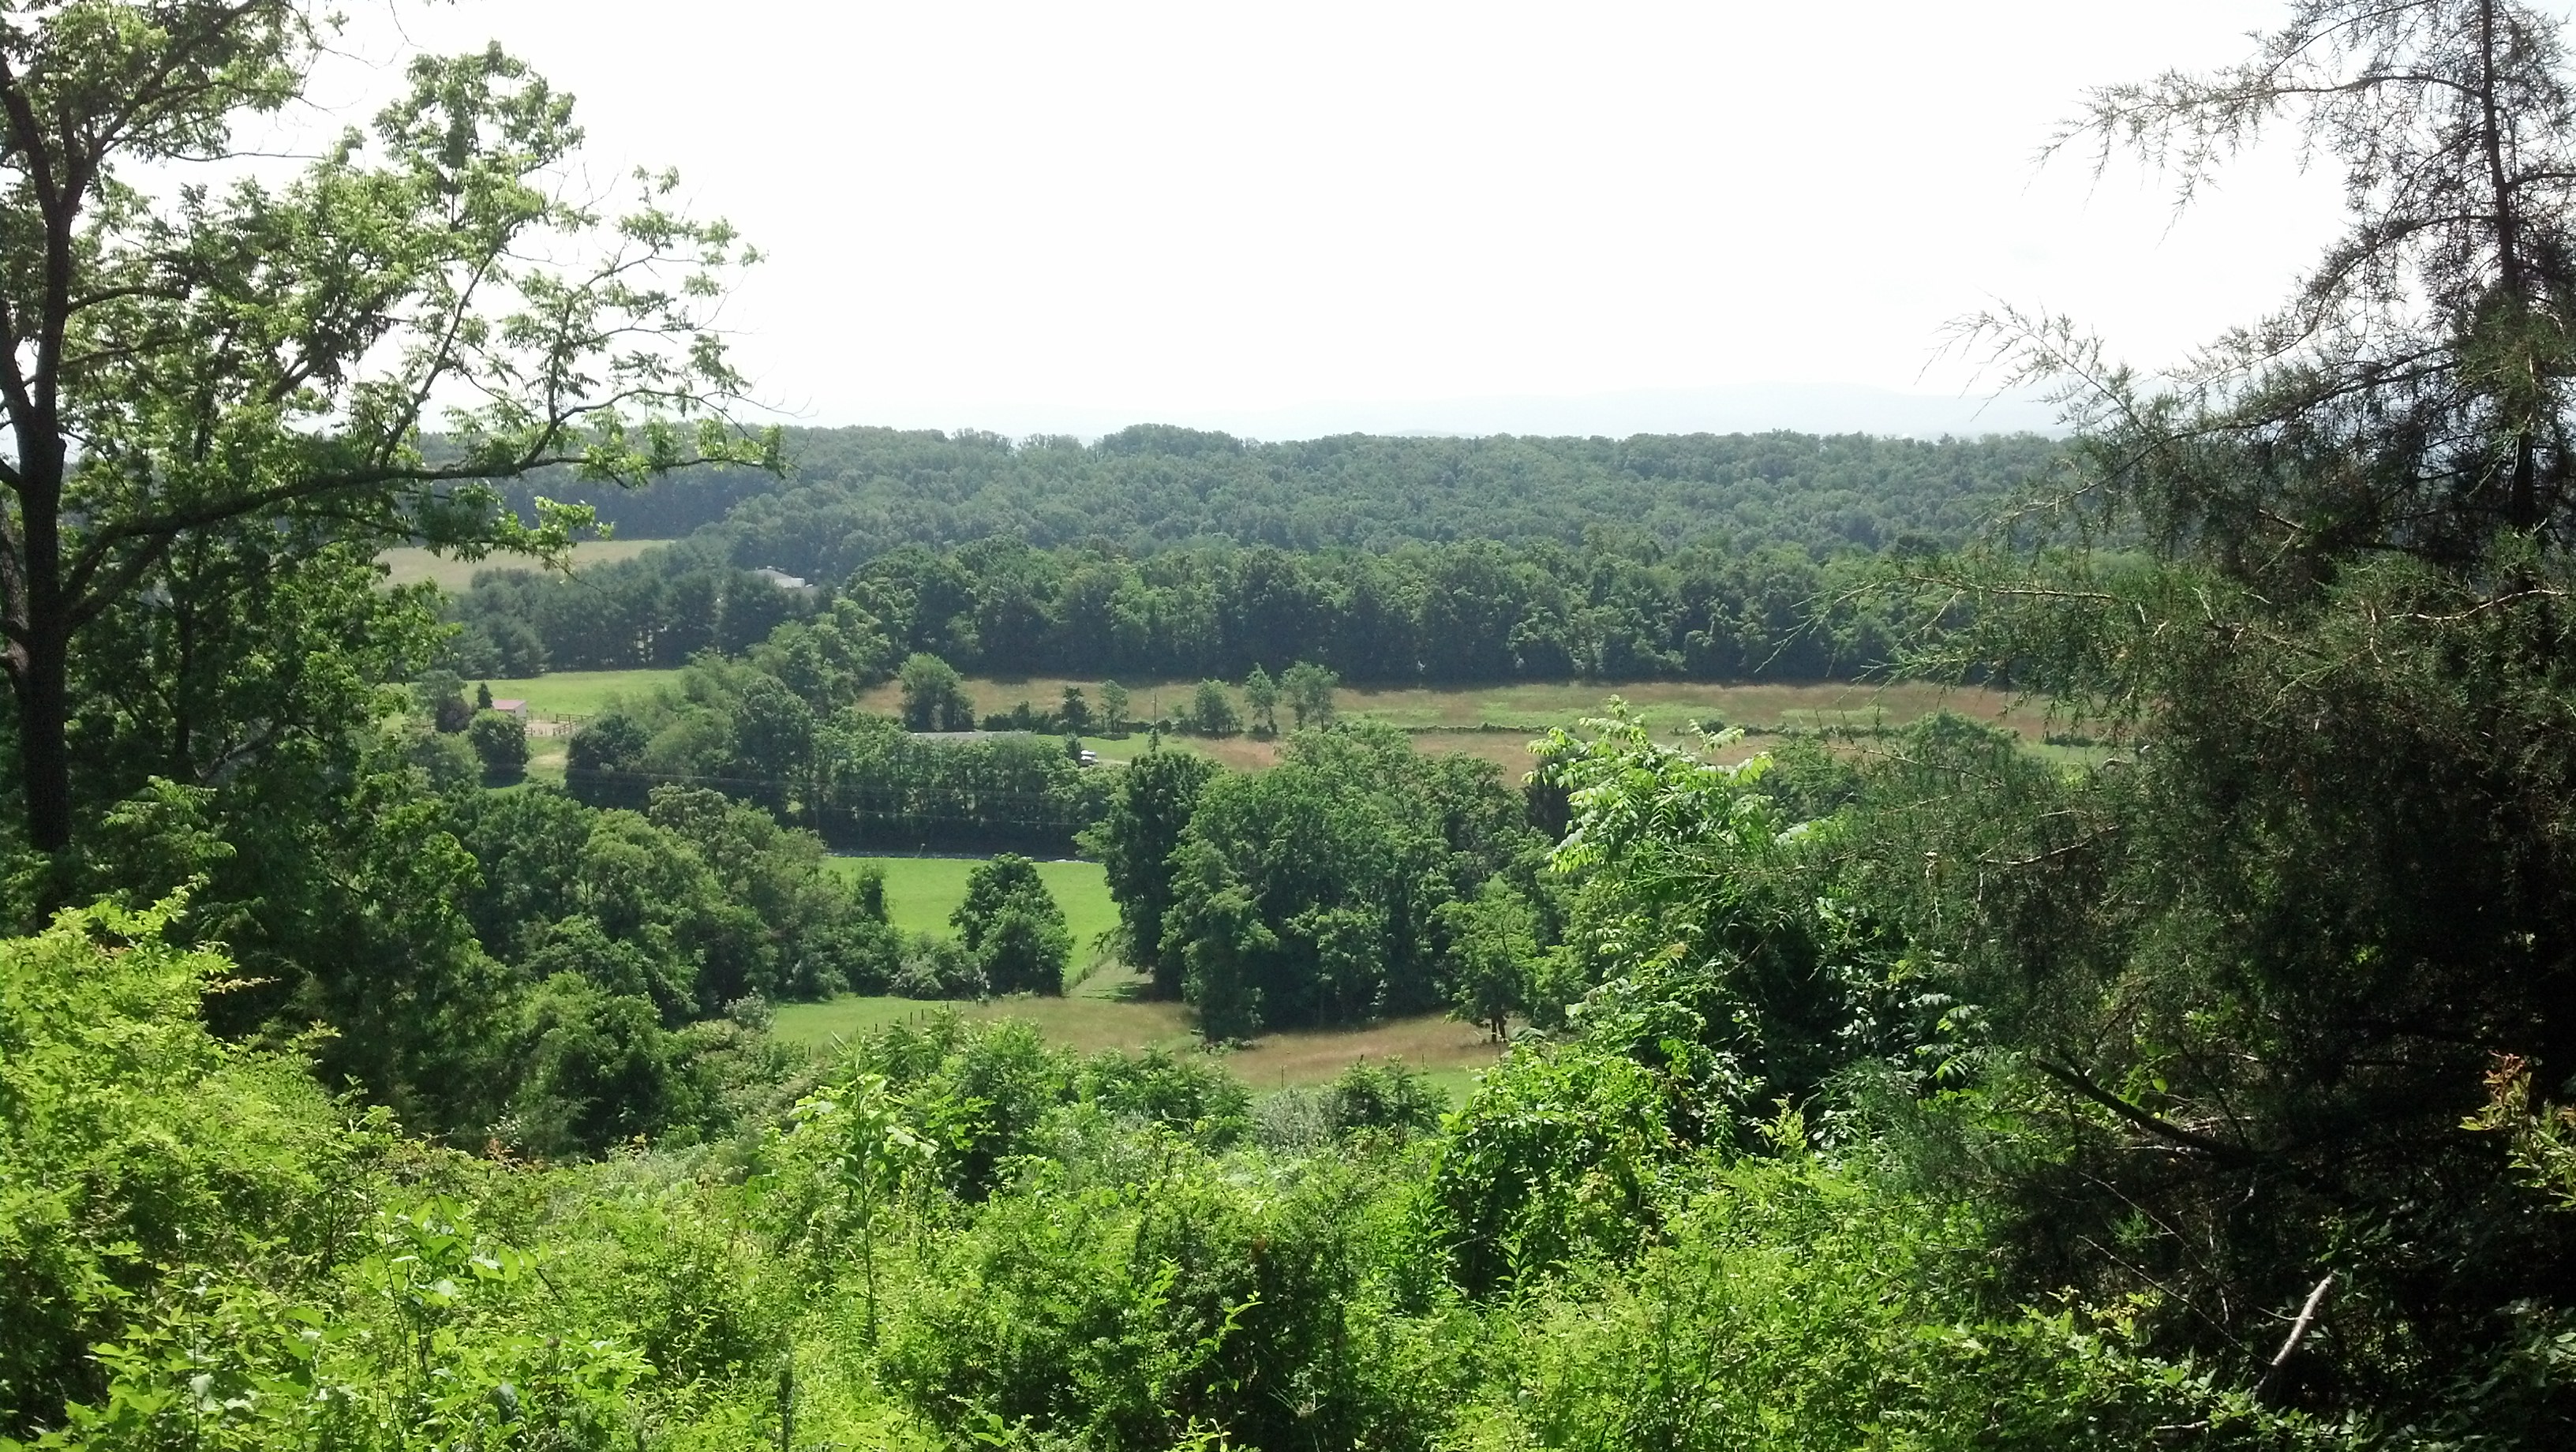 View from atop the hill